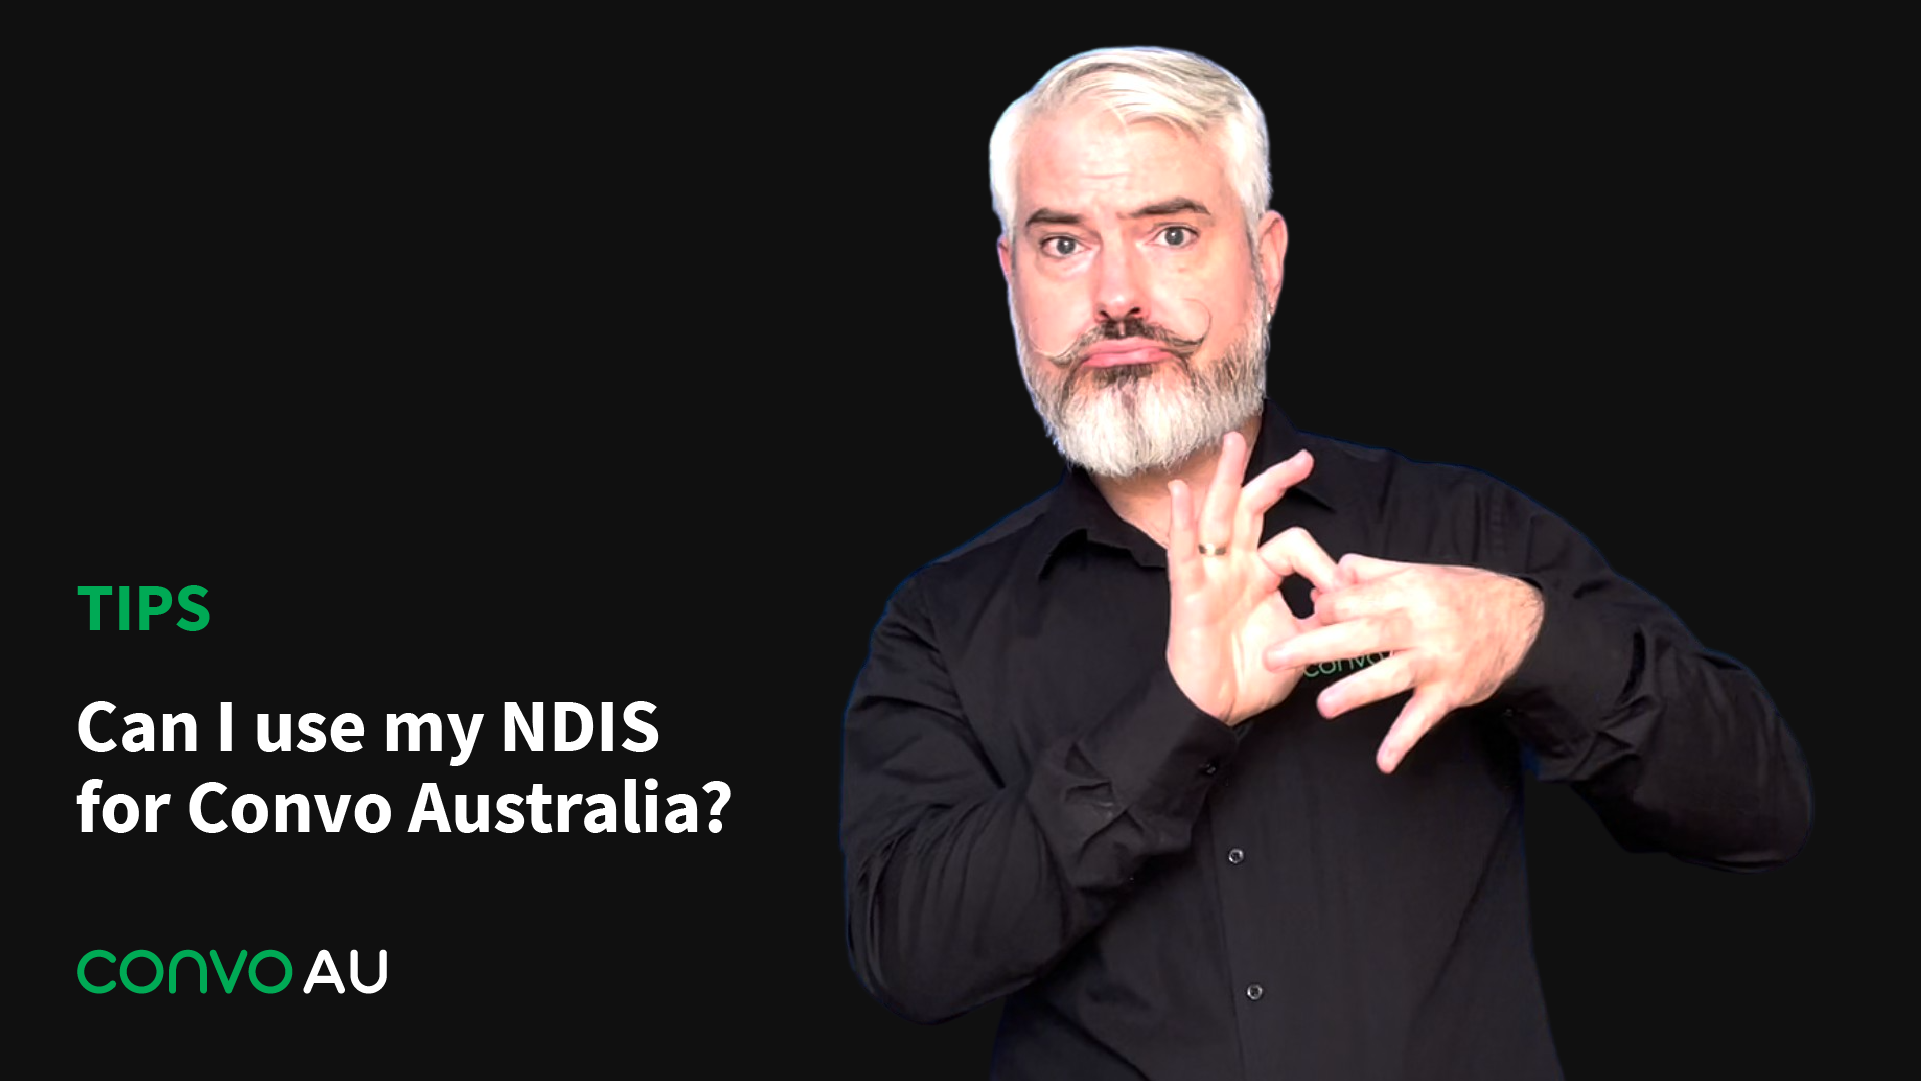 Tips - Can I use my NDIS for Convo Australia?